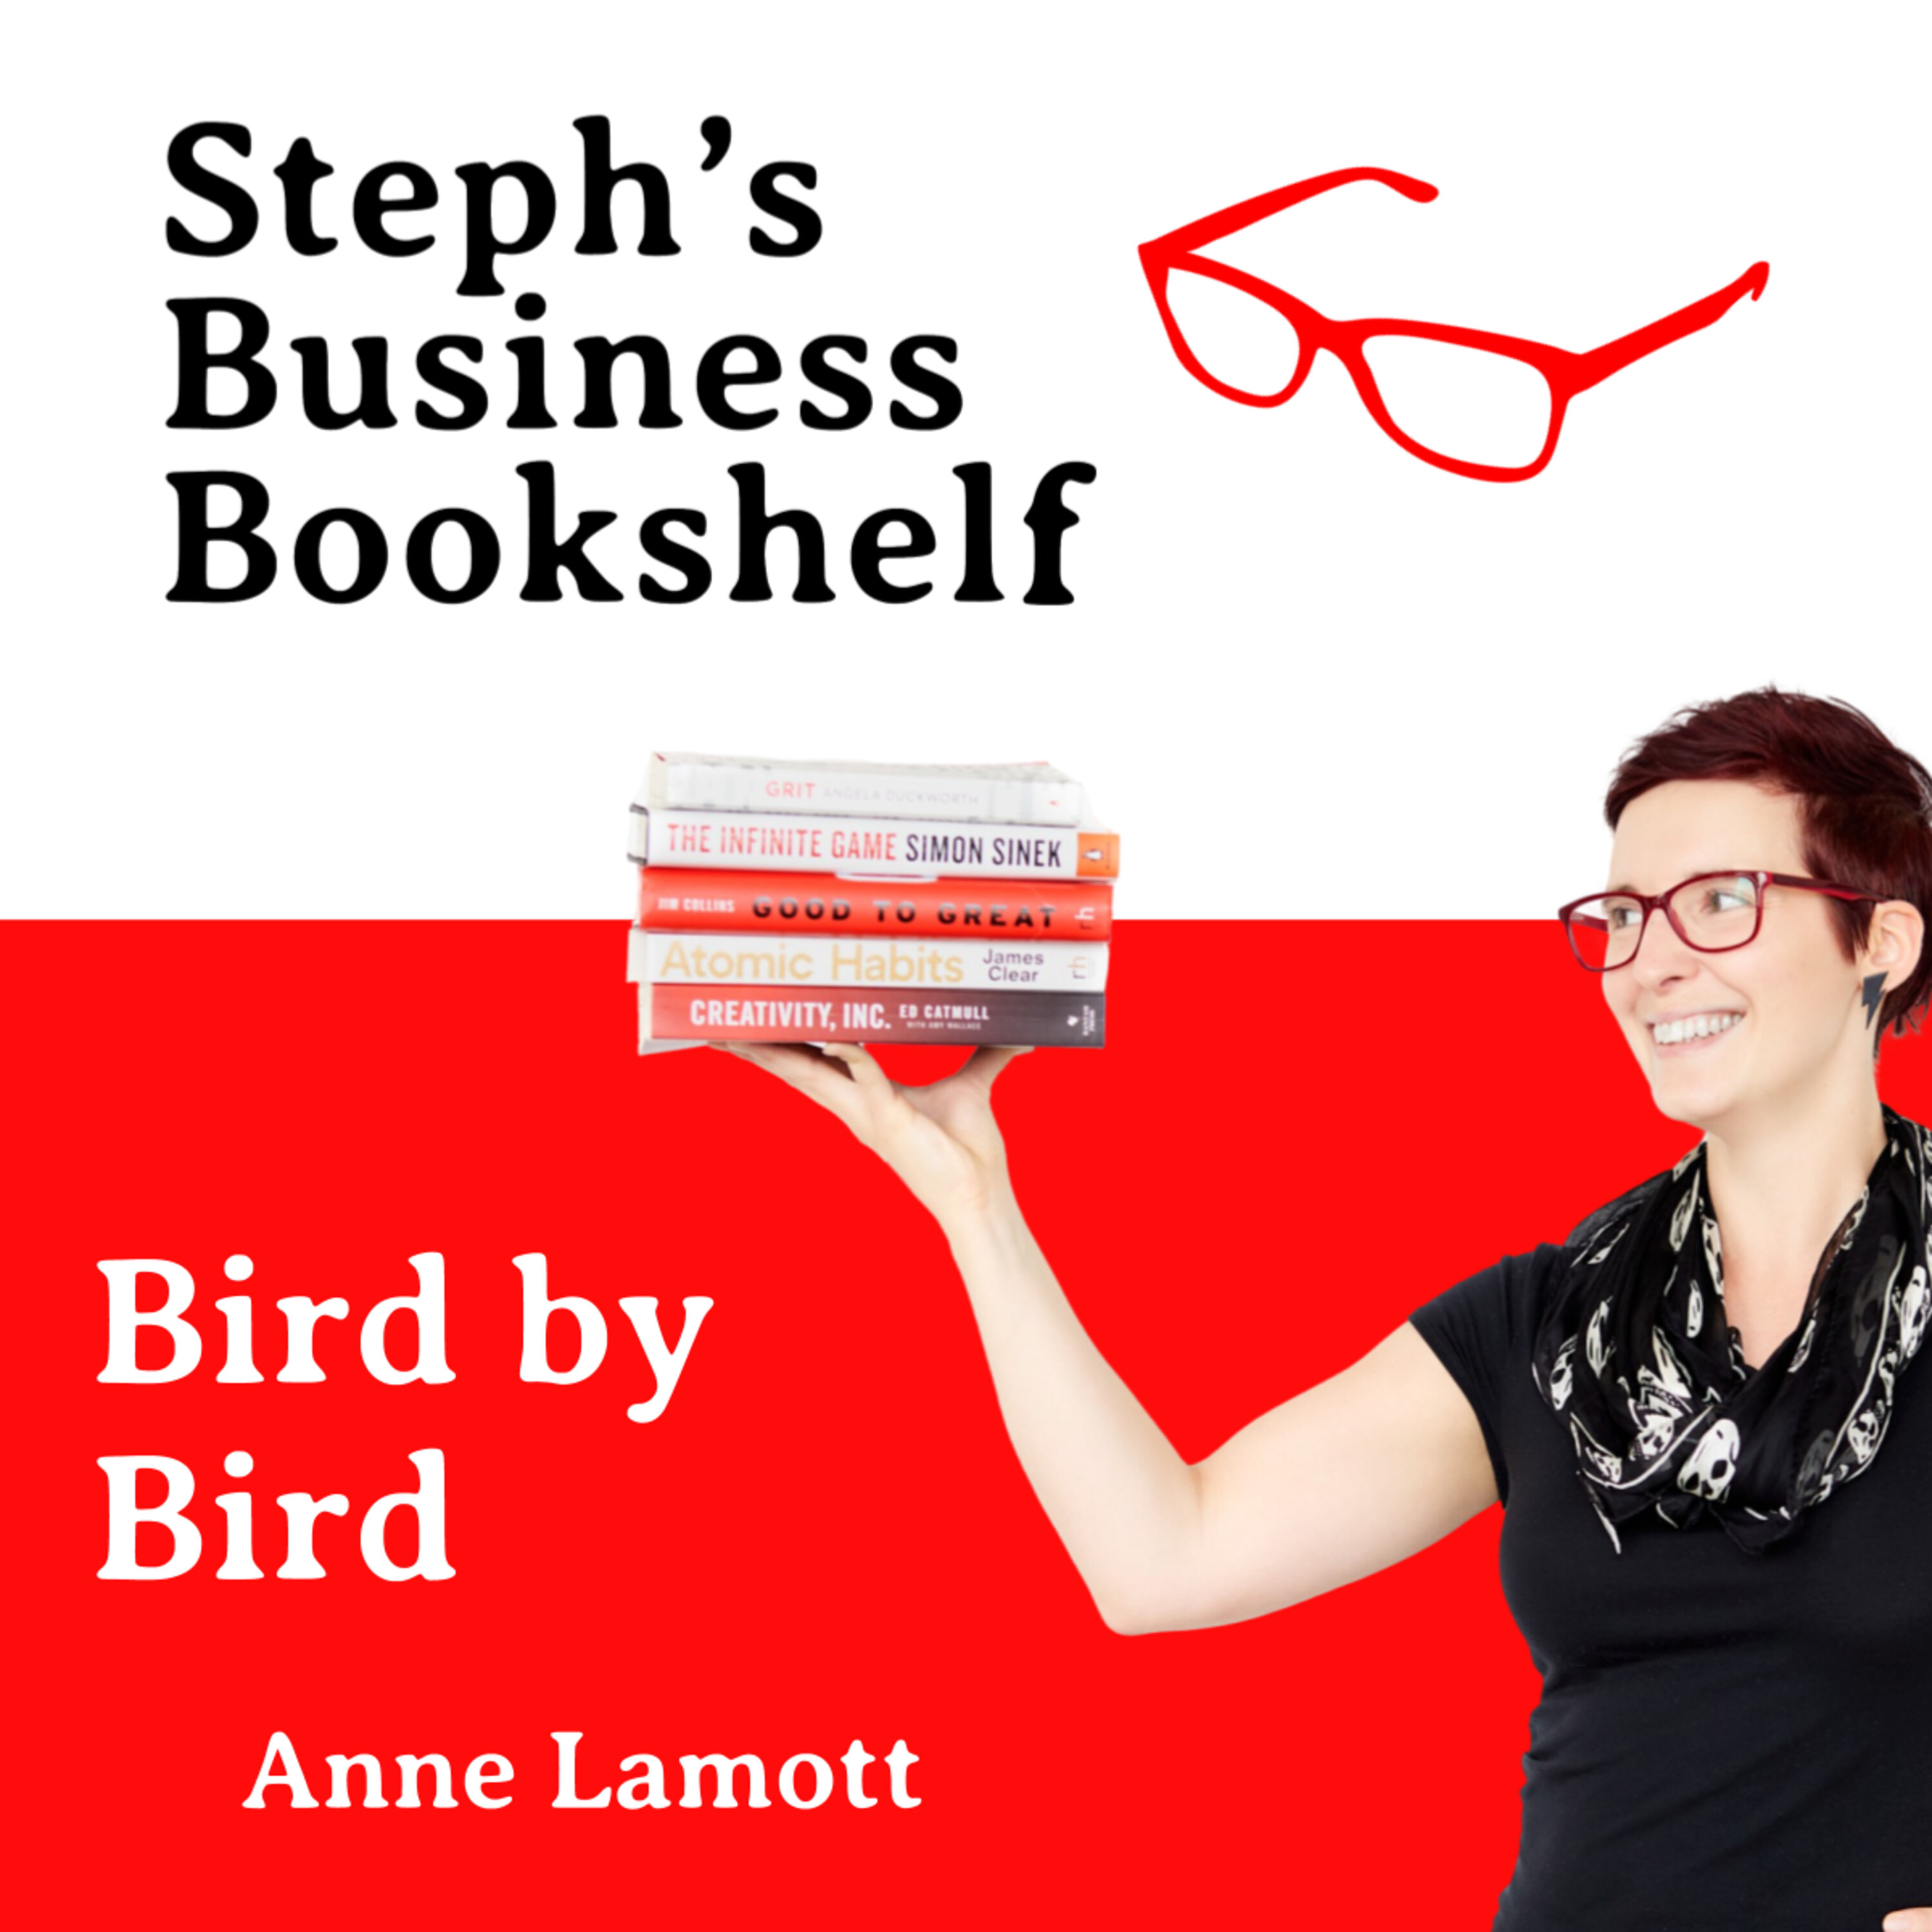 Bird by Bird by Anne Lamott: Why you need to start being more weird Image